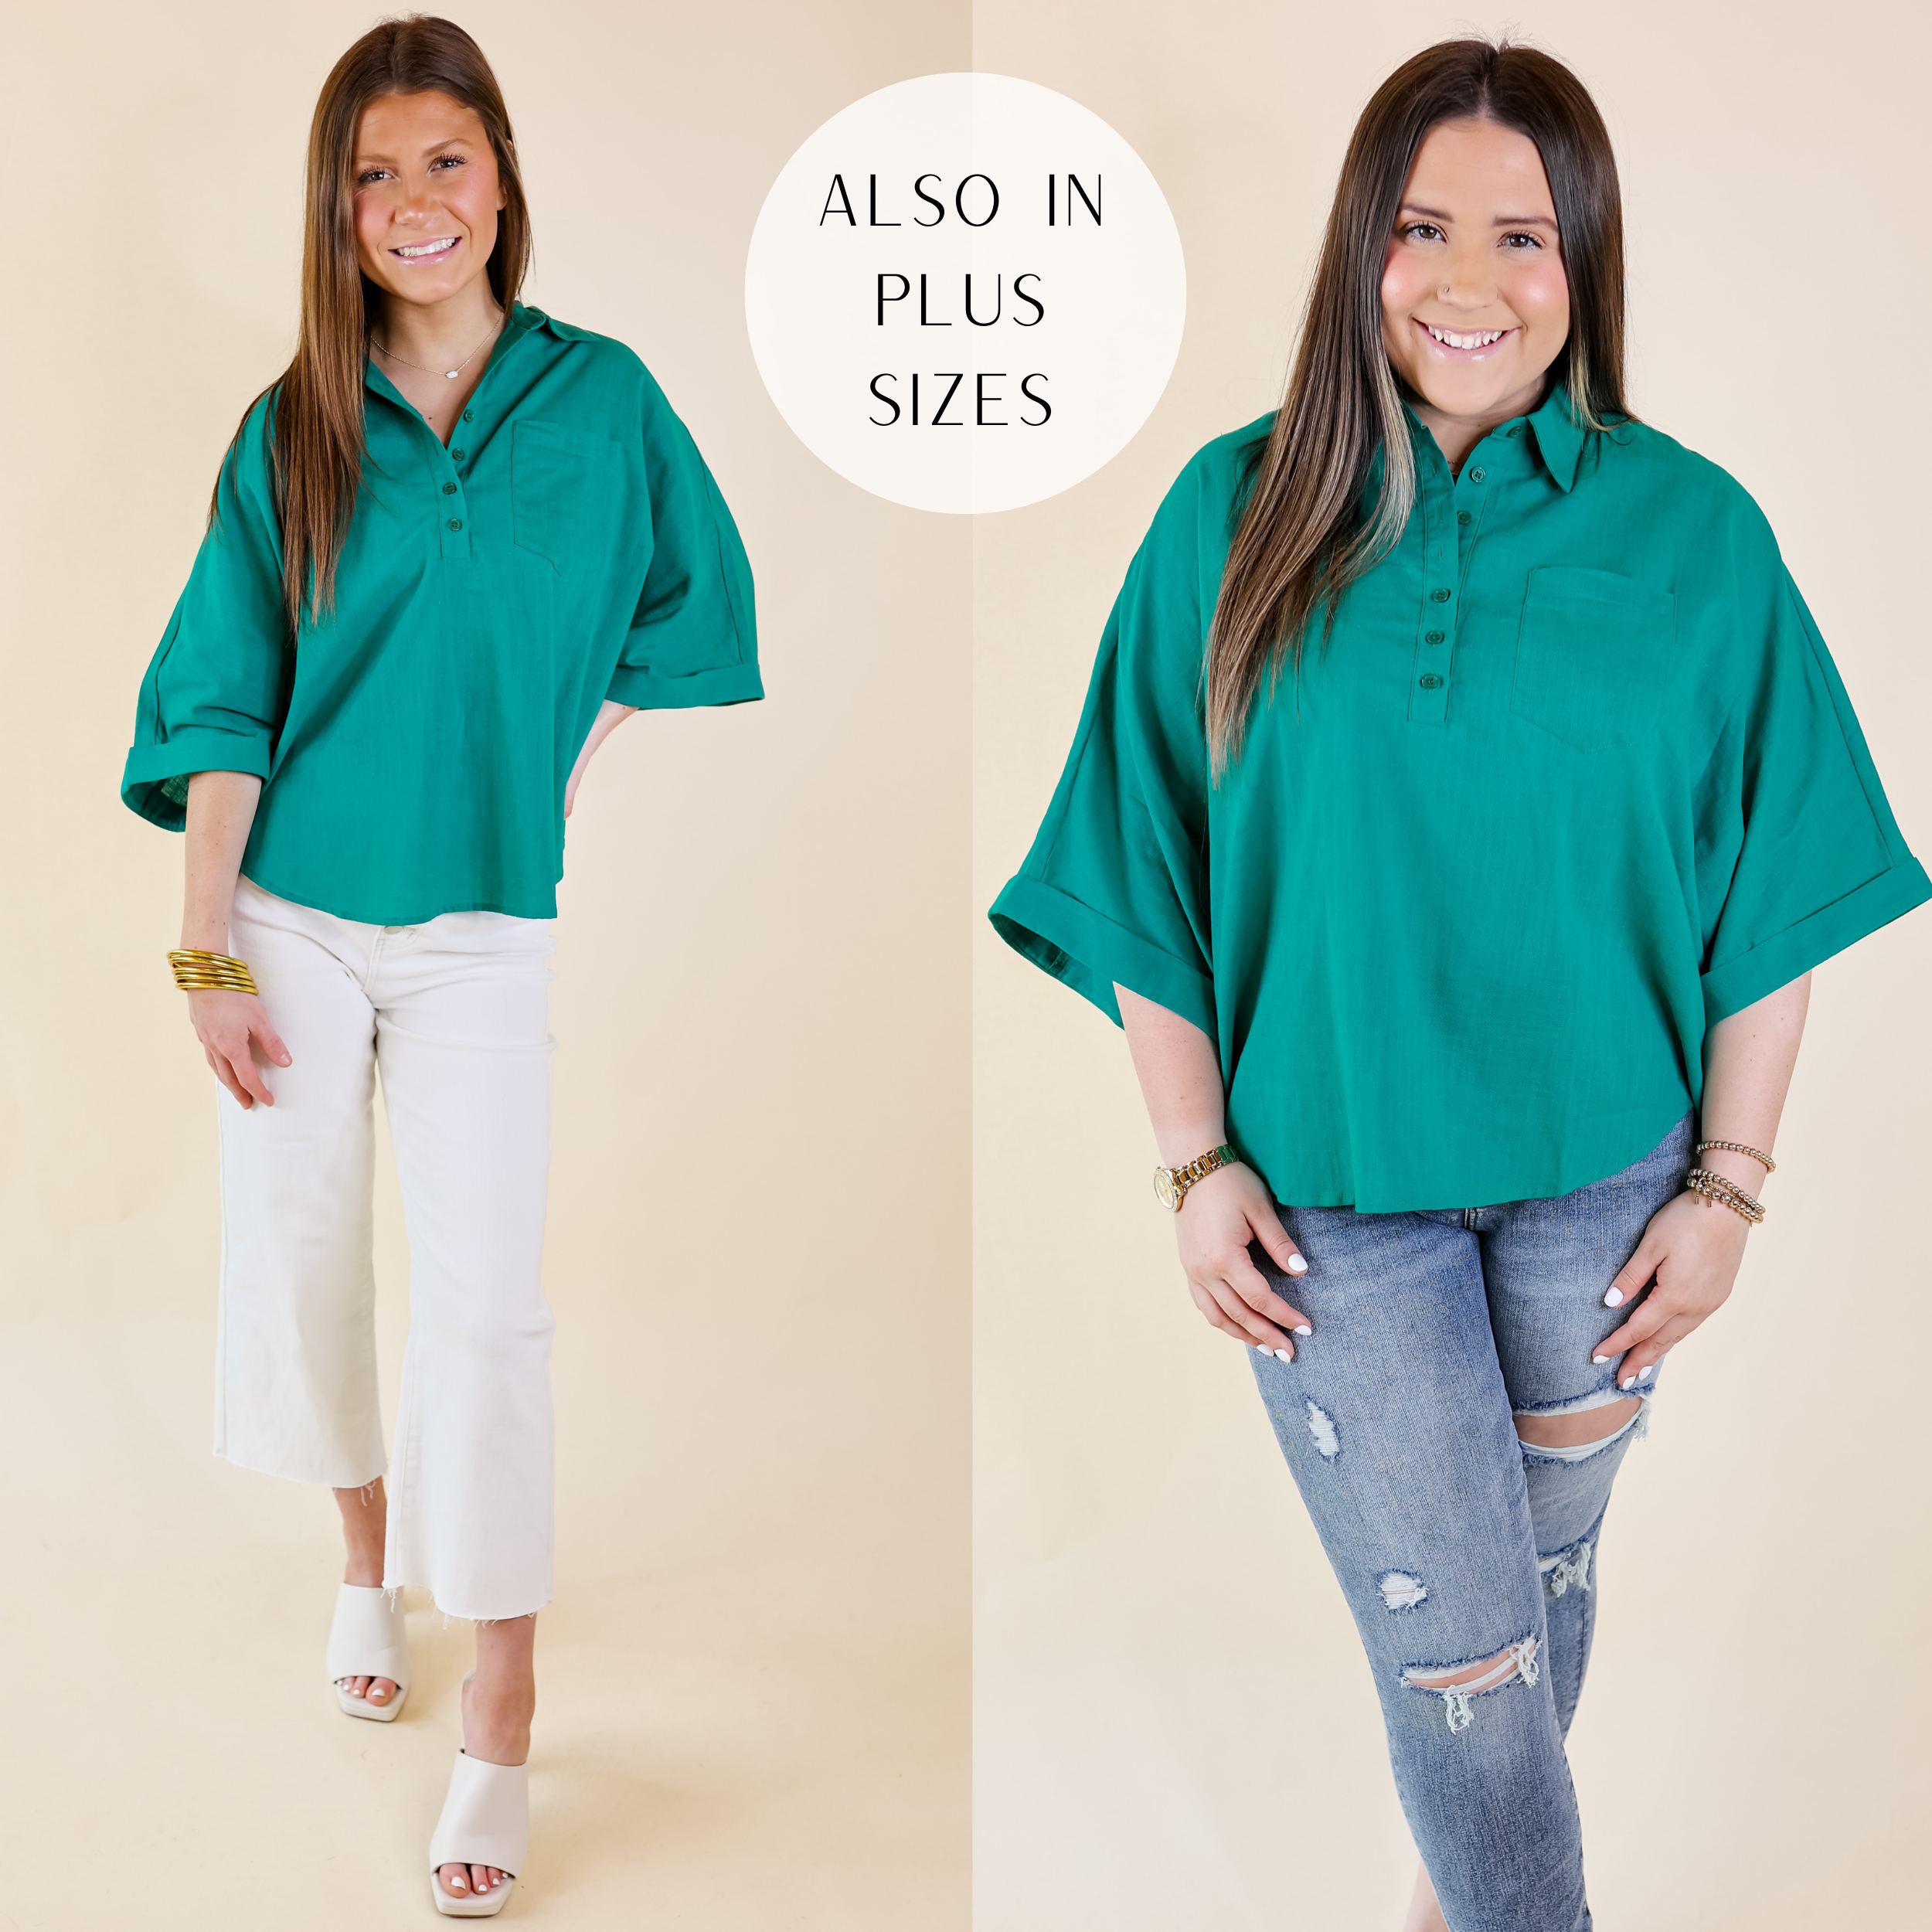 Model is wearing a half button up poncho top with a collared neckline and a cute teal color. Size small model has it paired with white jeans, ivory heels, and gold jewelry. Size large model has it paired with distressed skinny jeans, ivory mules, and gold jewelry.